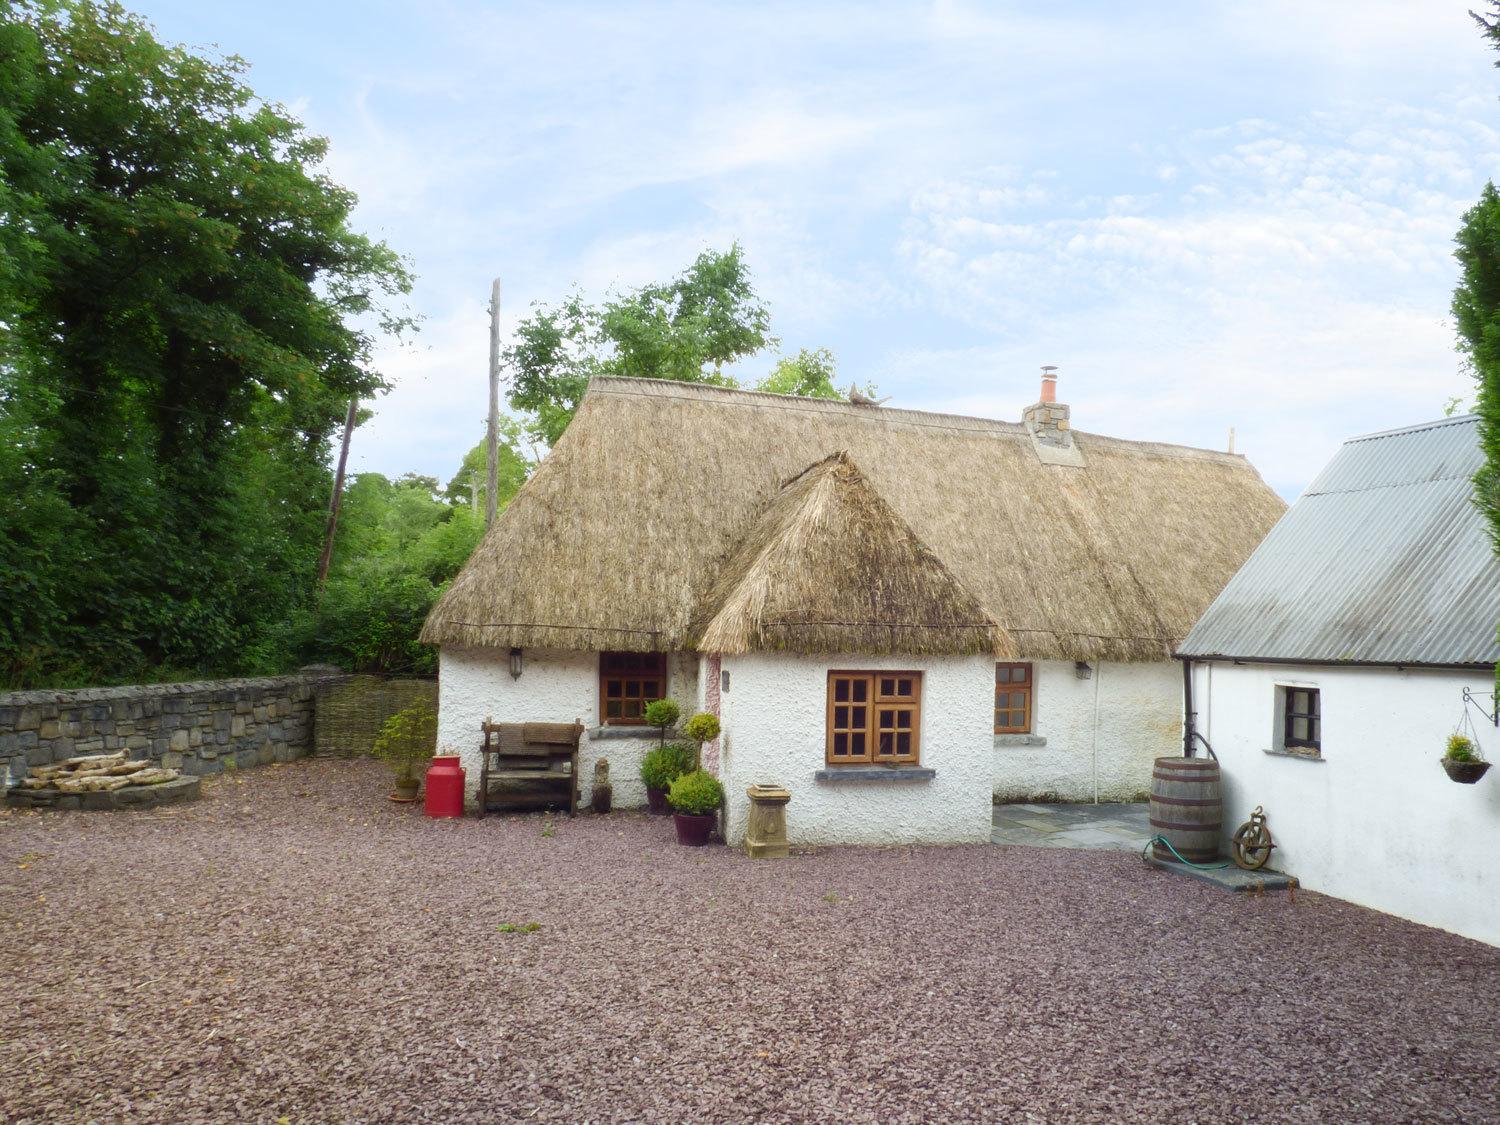 The Thatch Cottage